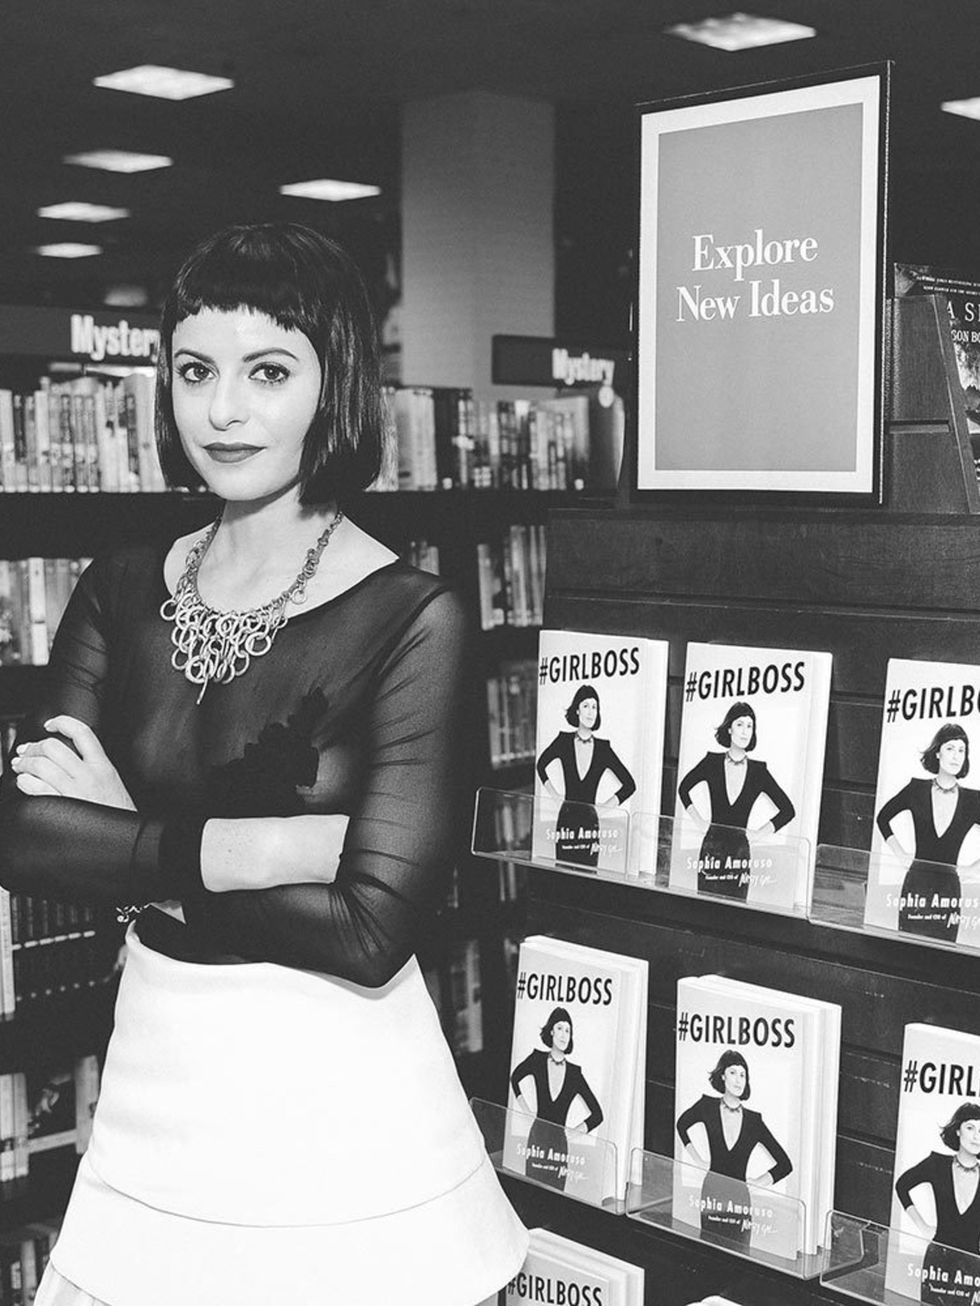 <p><strong>Sophia Amoruso, CEO and Creative Director of Nasty Gal </strong></p>

<p>'What does a feminist look like? Thats the trick! Feminists look like you and me, like a women in 6 stilettos and a woman in mens clothing. Feminism is a way of thinking